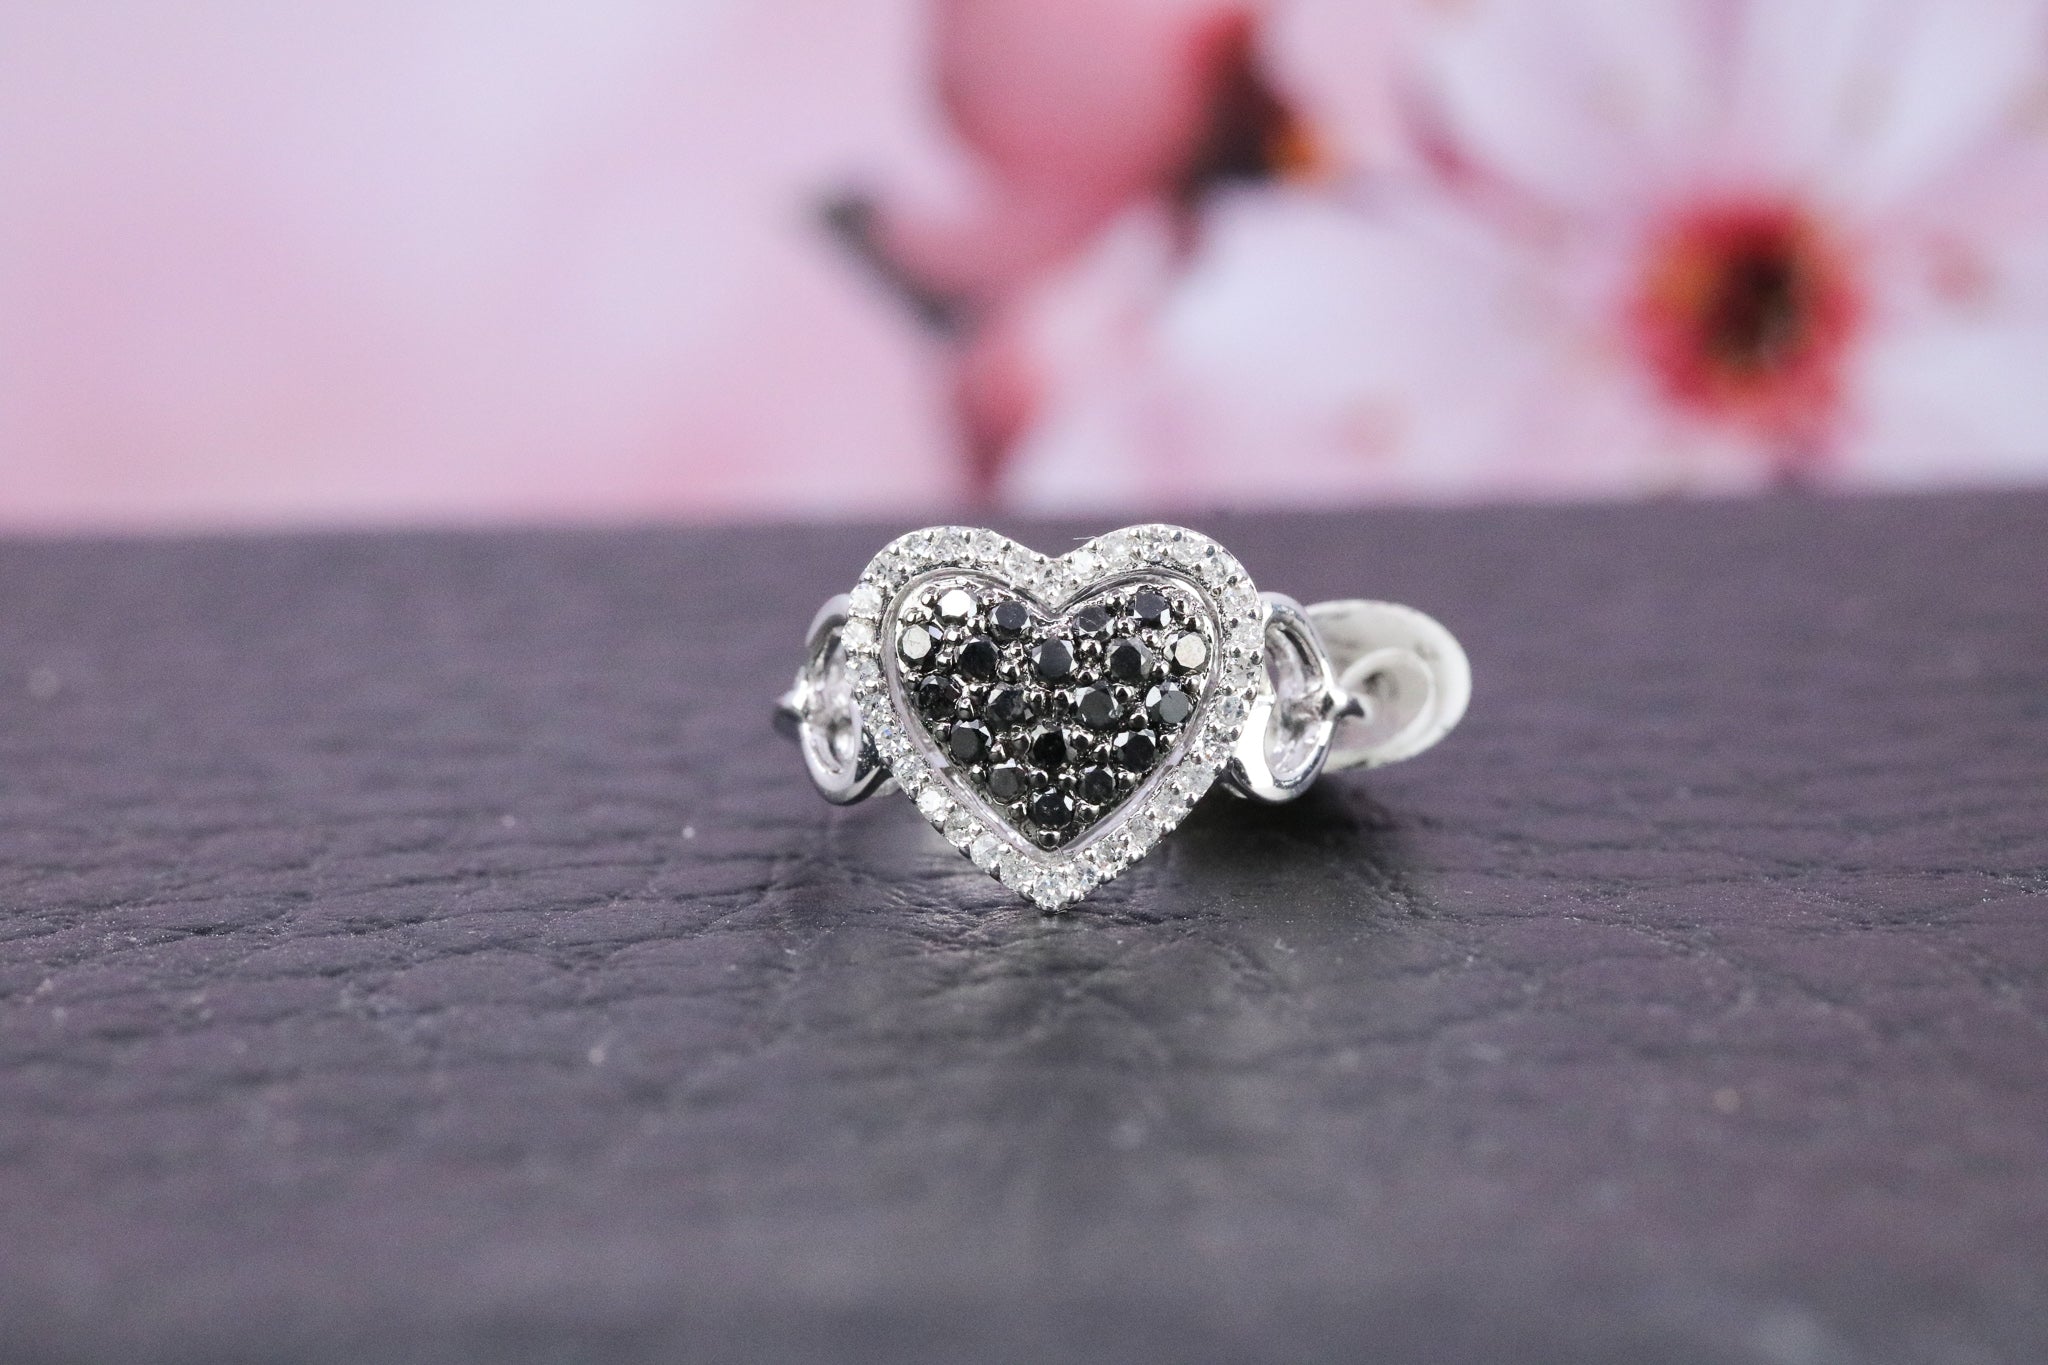 9ct White Gold Diamond Ring - CO1144 - Hallmark Jewellers Formby & The Jewellers Bench Widnes